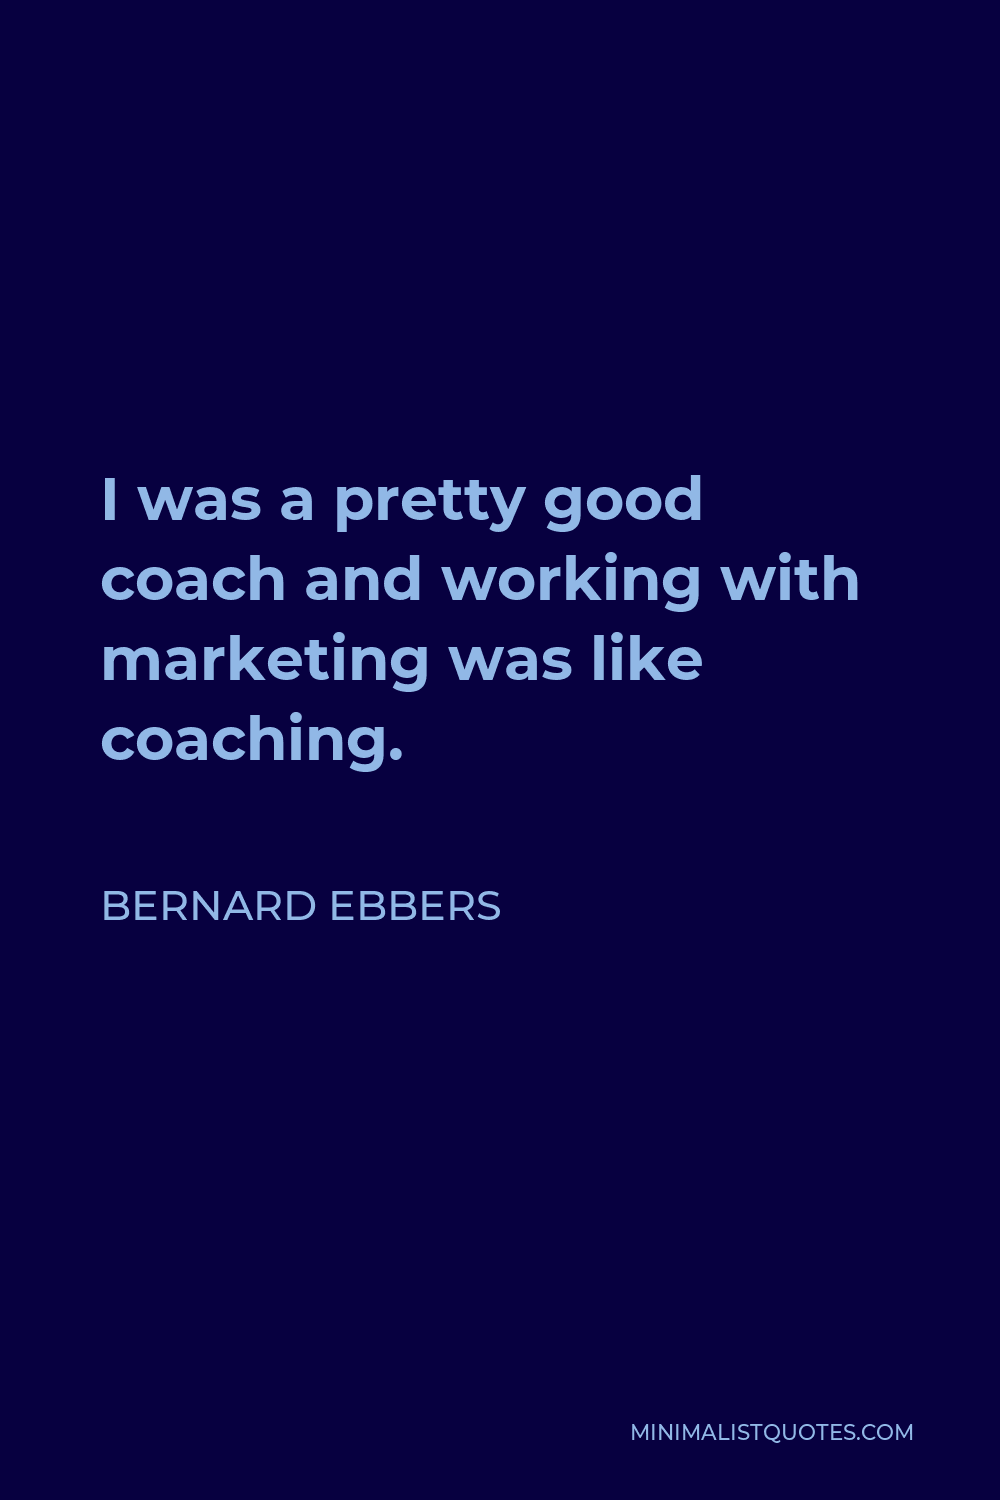 Bernard Ebbers Quote - I was a pretty good coach and working with marketing was like coaching.